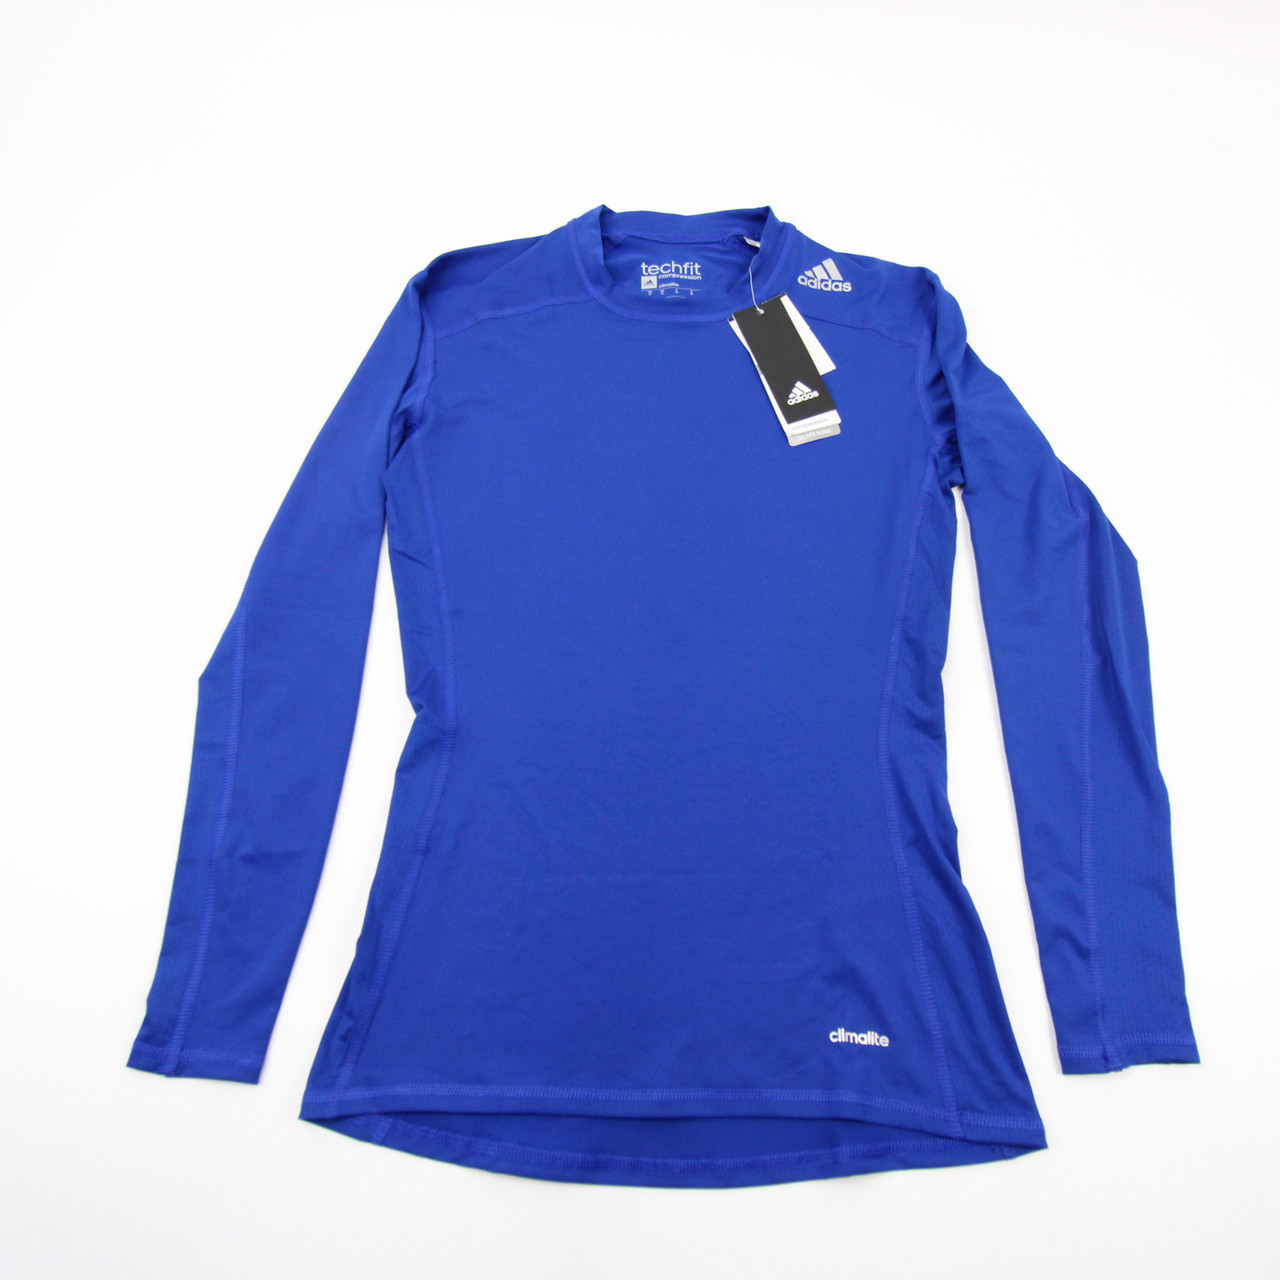 adidas Techfit Compression Top Men's Blue New with Tags M 163